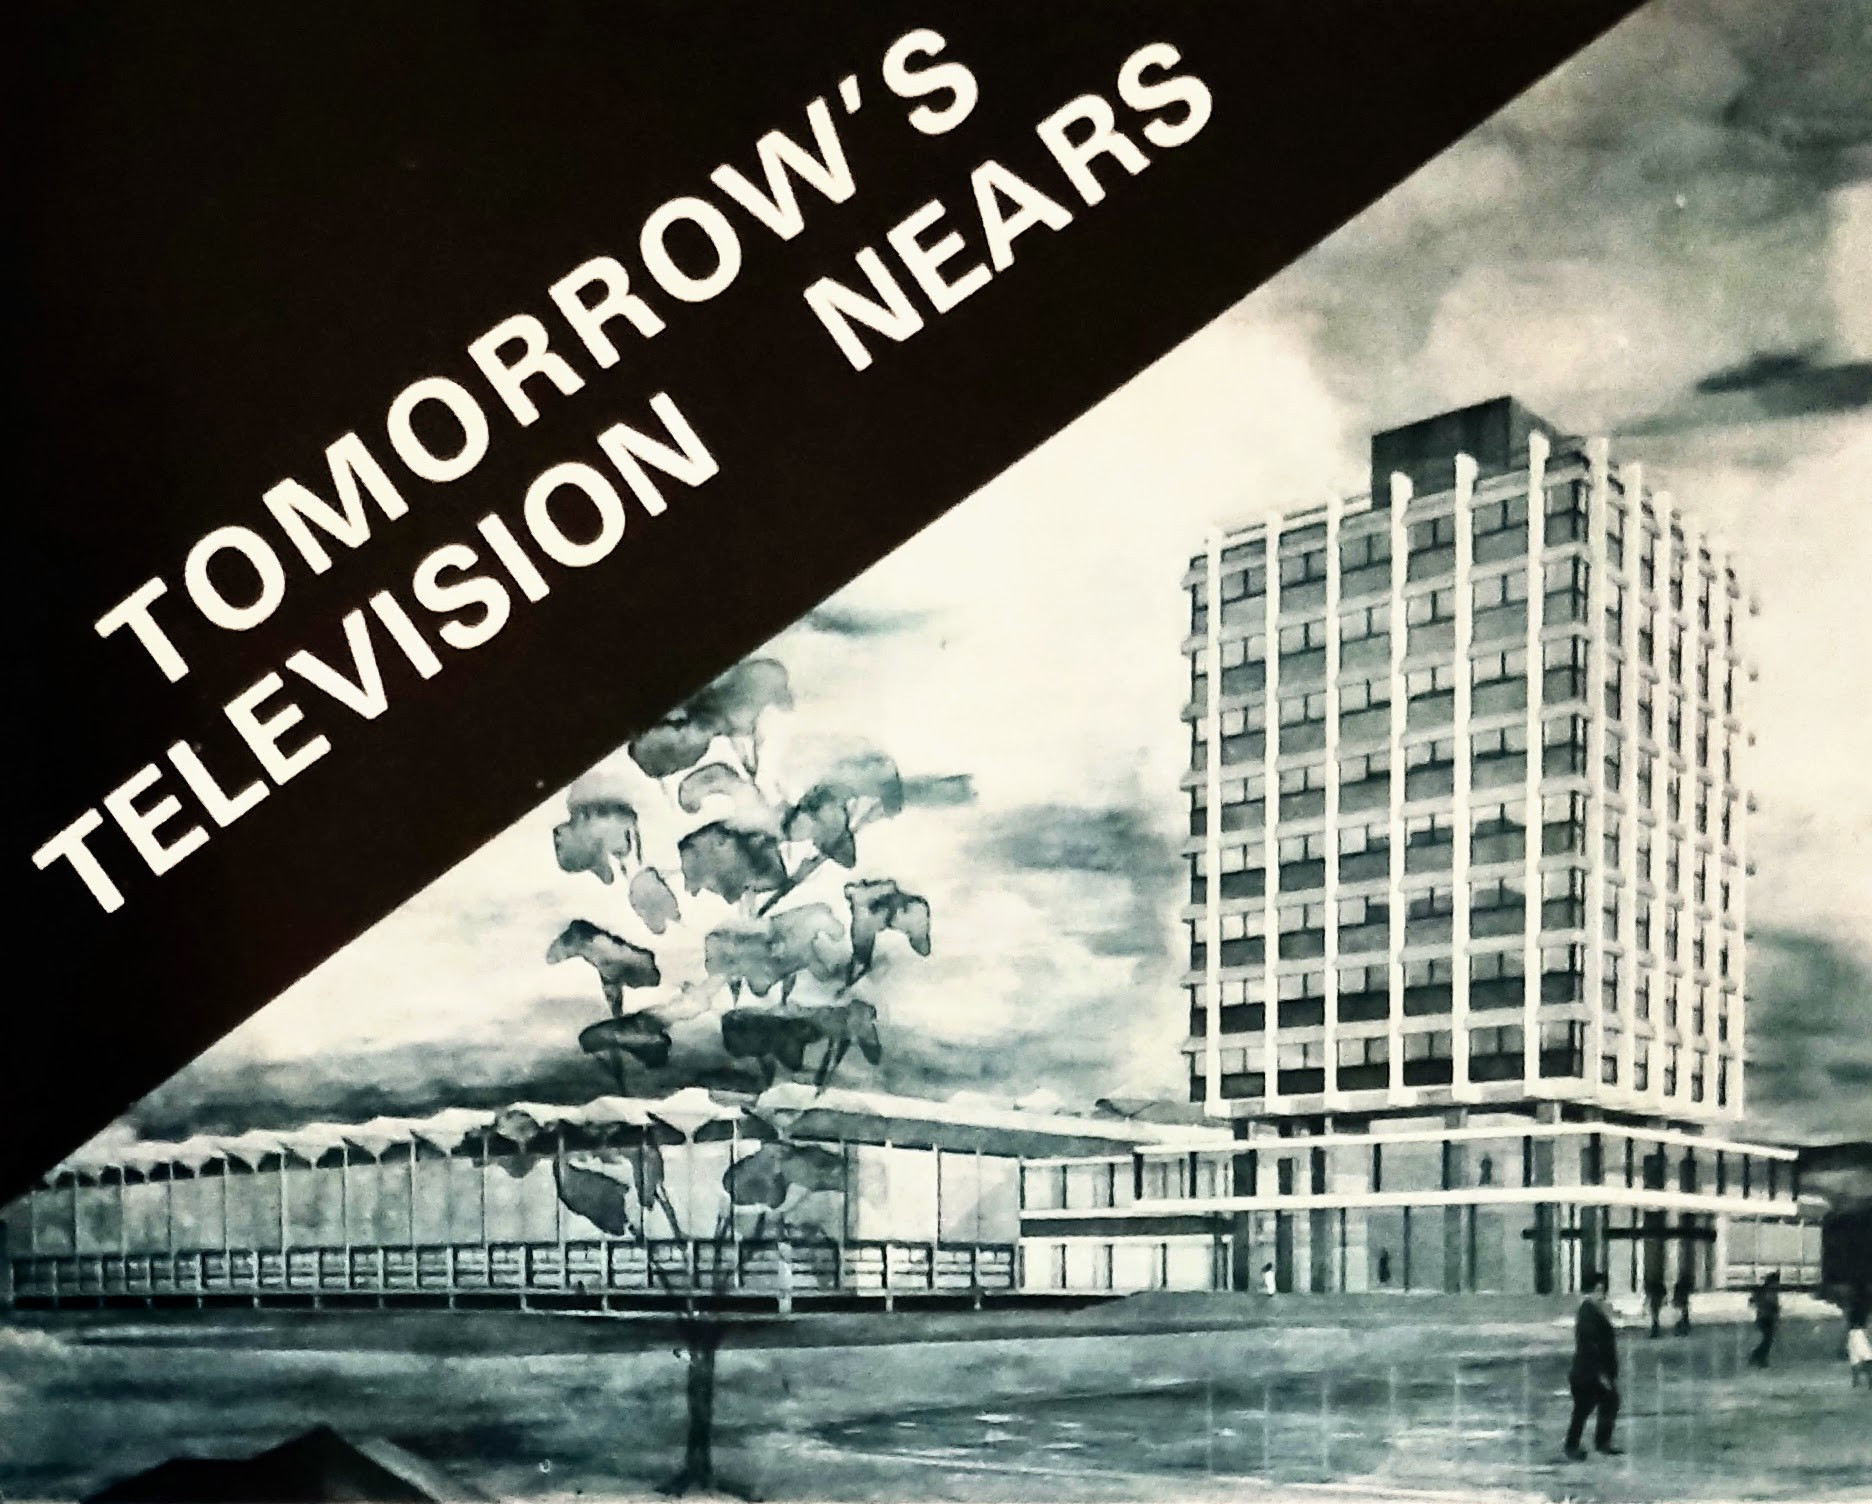 Concept art - Tomorrows Television Nears